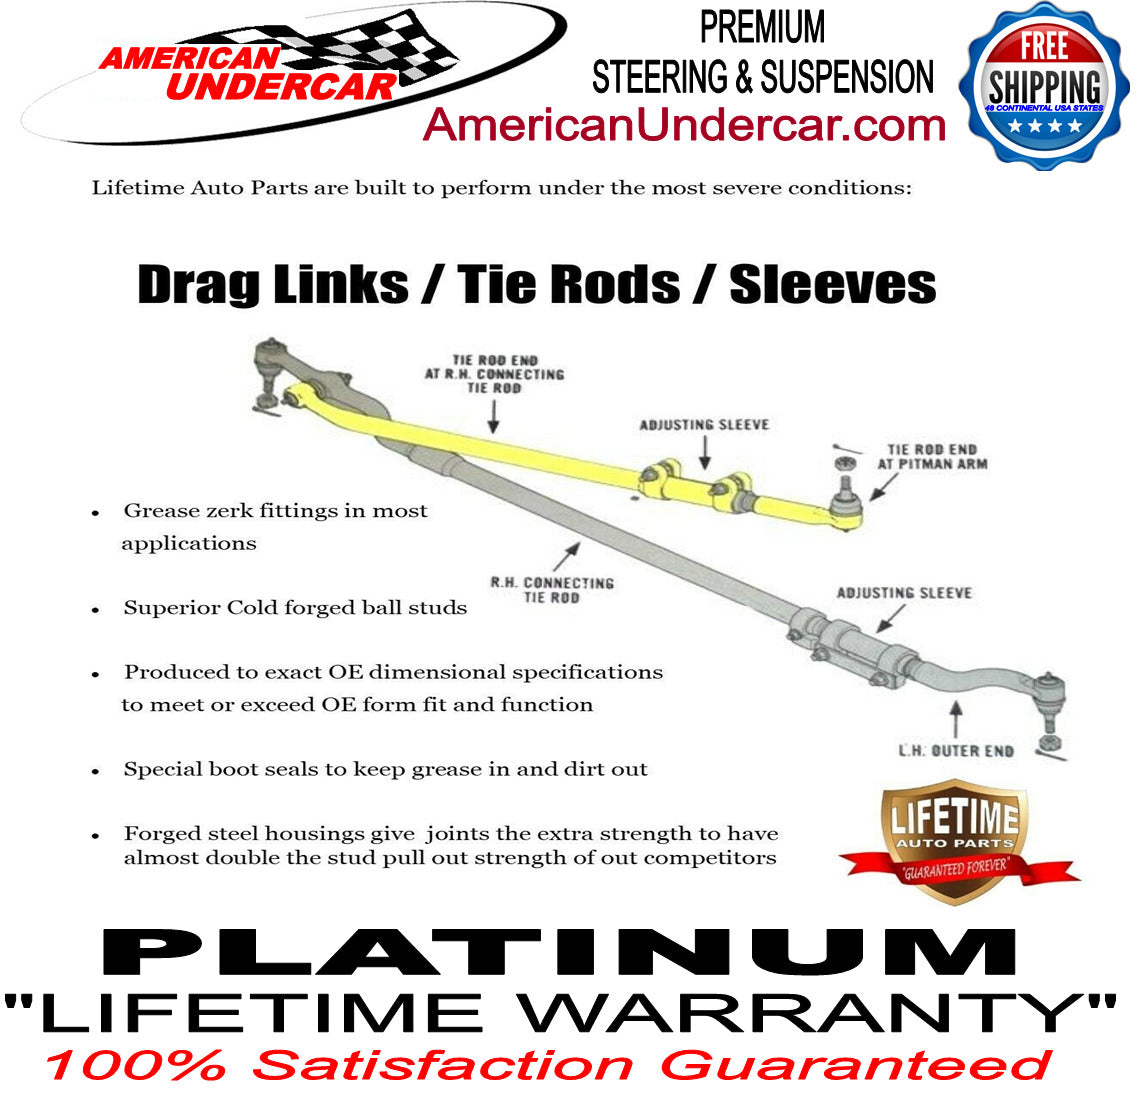 Lifetime Ball Joint Tie Rod Drag Link Sleeve Steering Kit for 1995-1996 Ford F250 4x4 with Twin I-Beam,3850lb axle